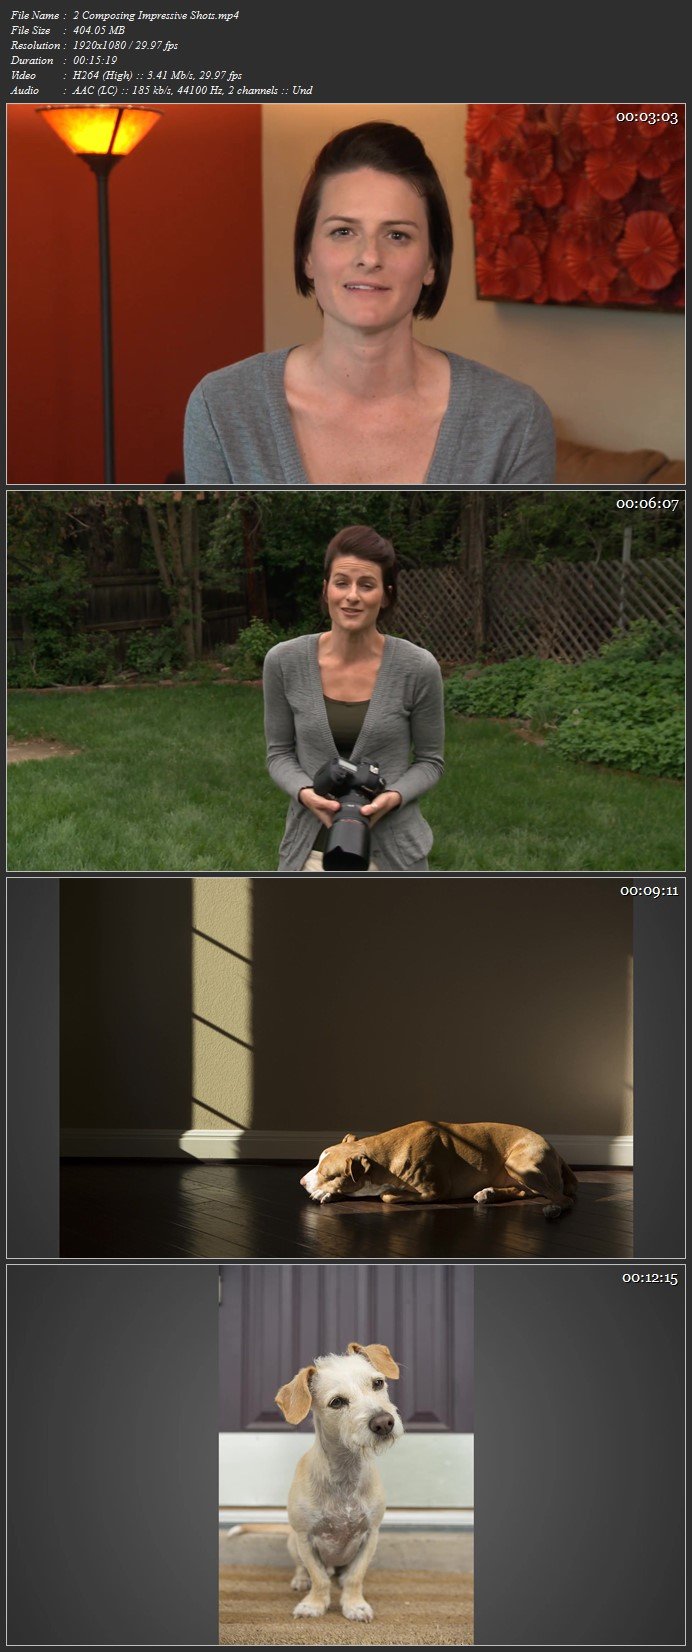 Pet Photography with Norah Levine